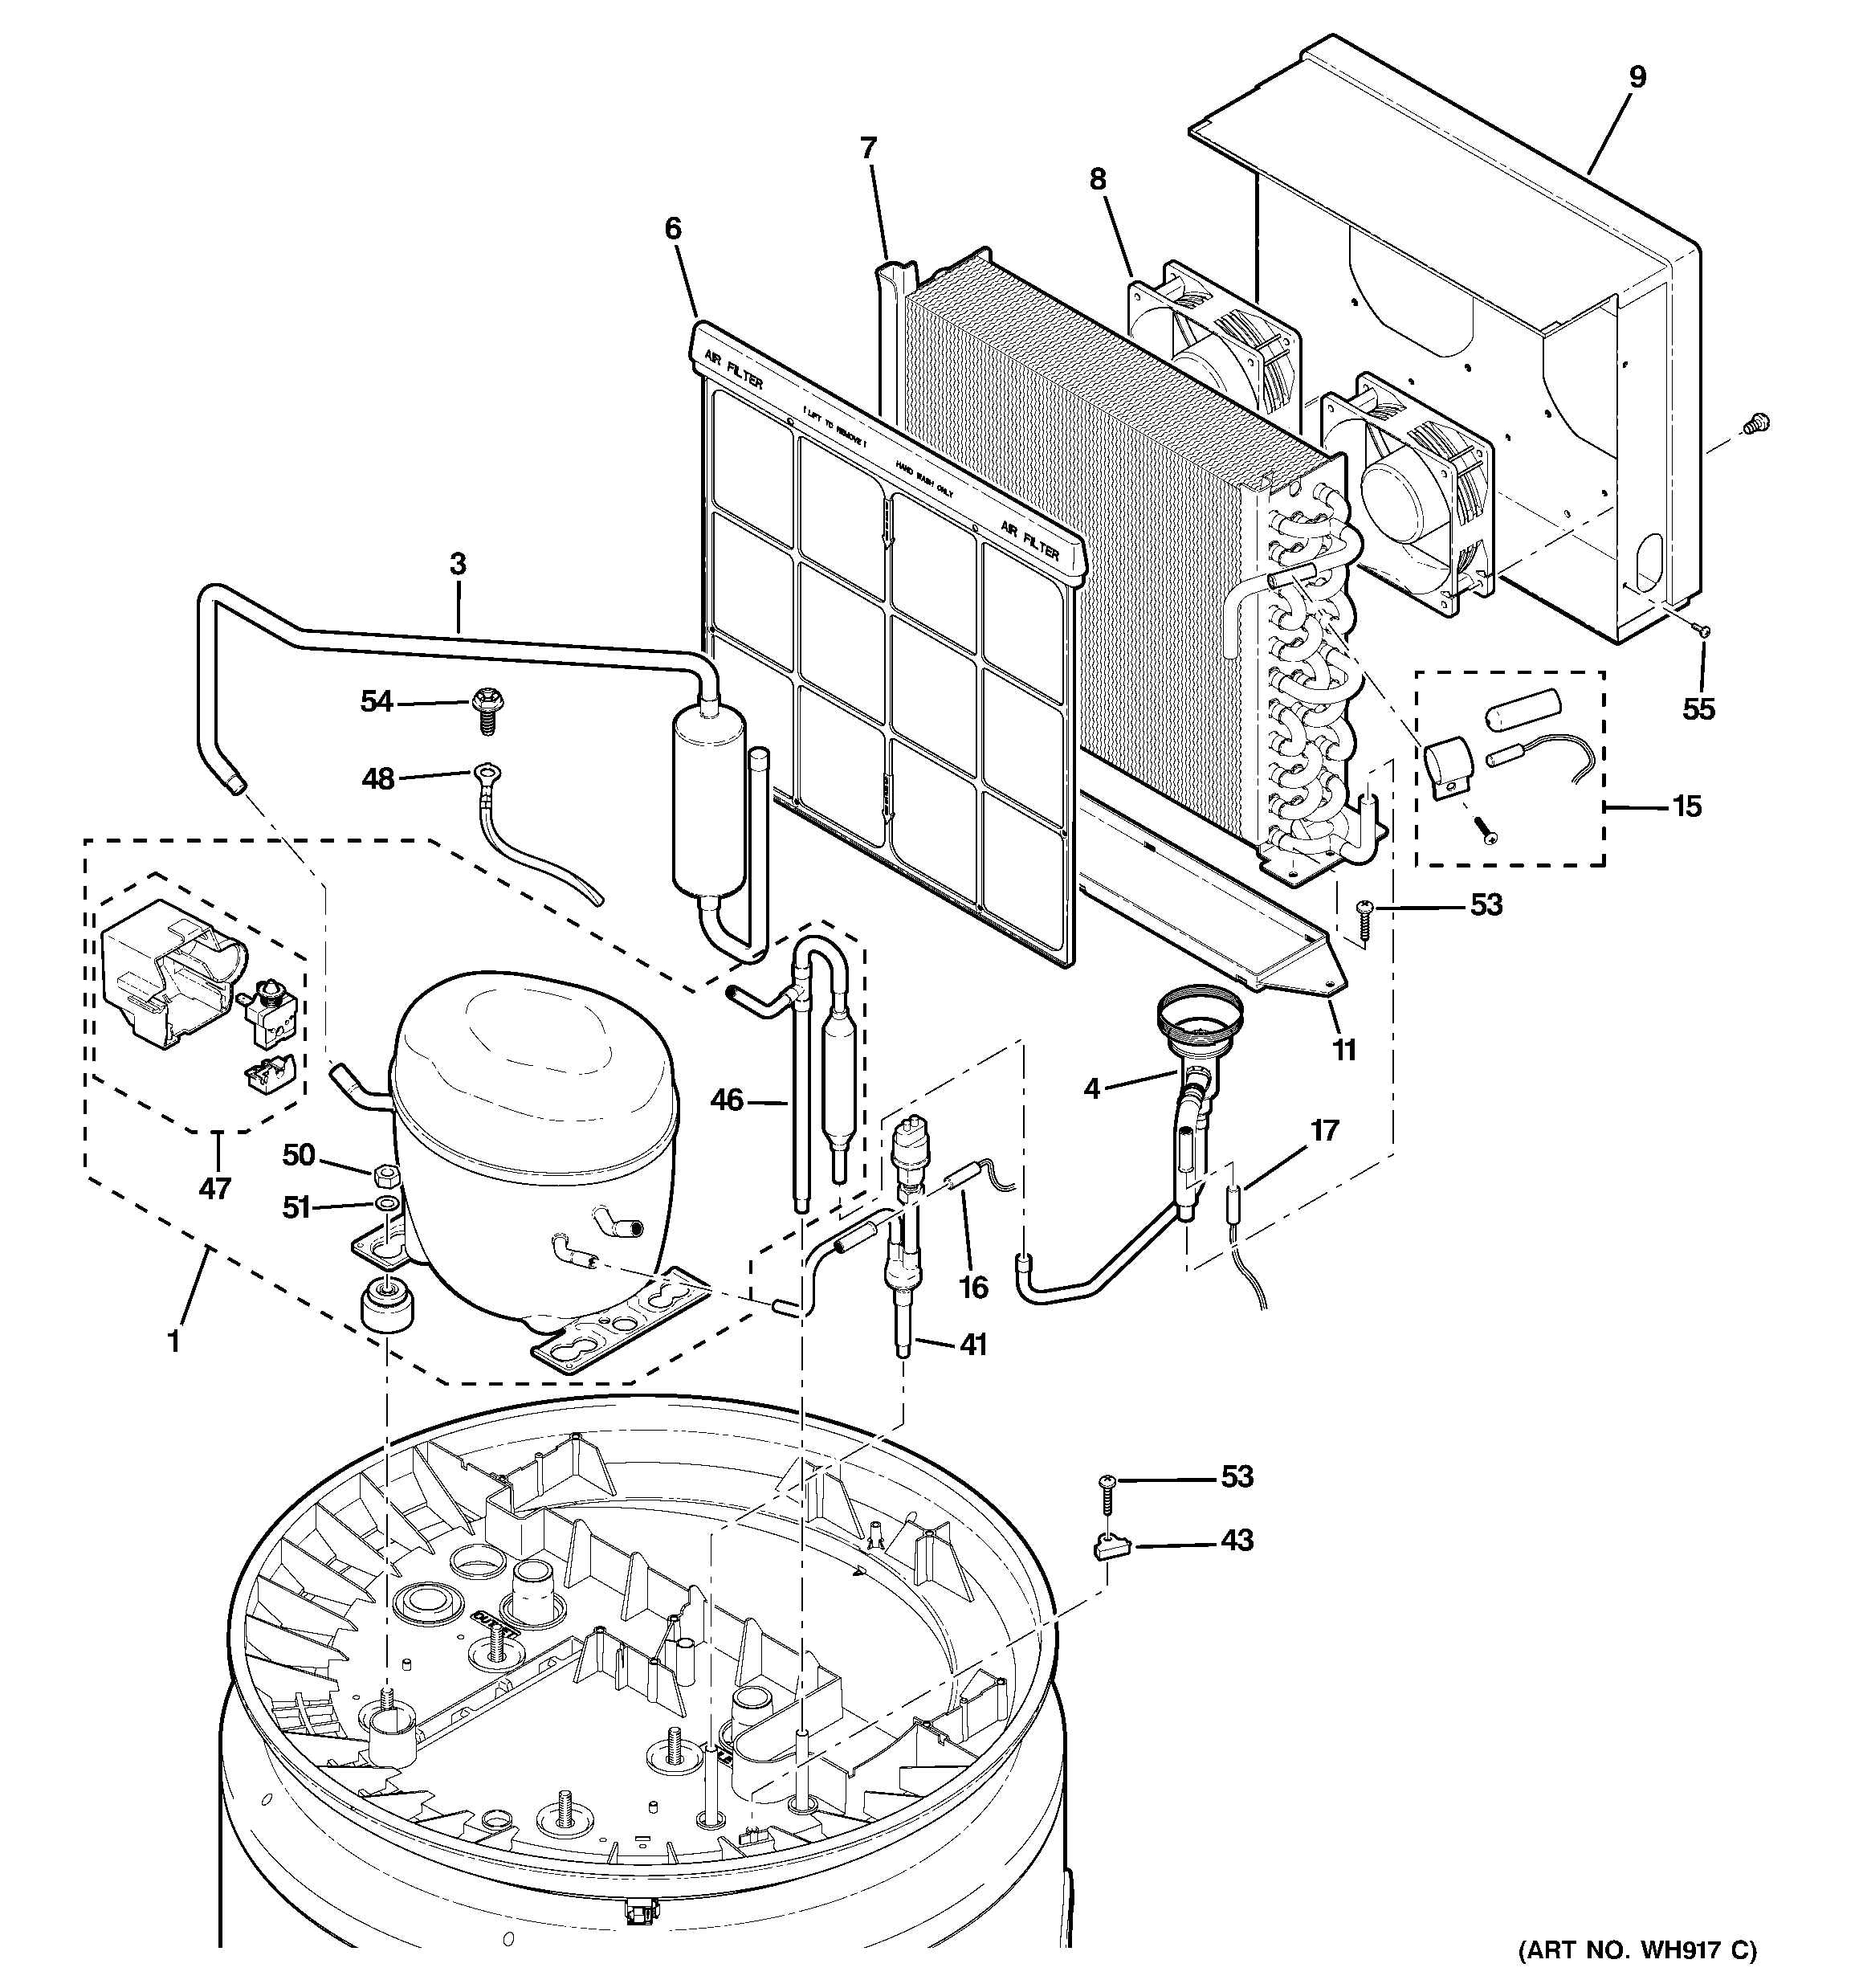 Water Heater Parts Diagram Ge Water Heater Parts Diagram Preview Wiring Diagram